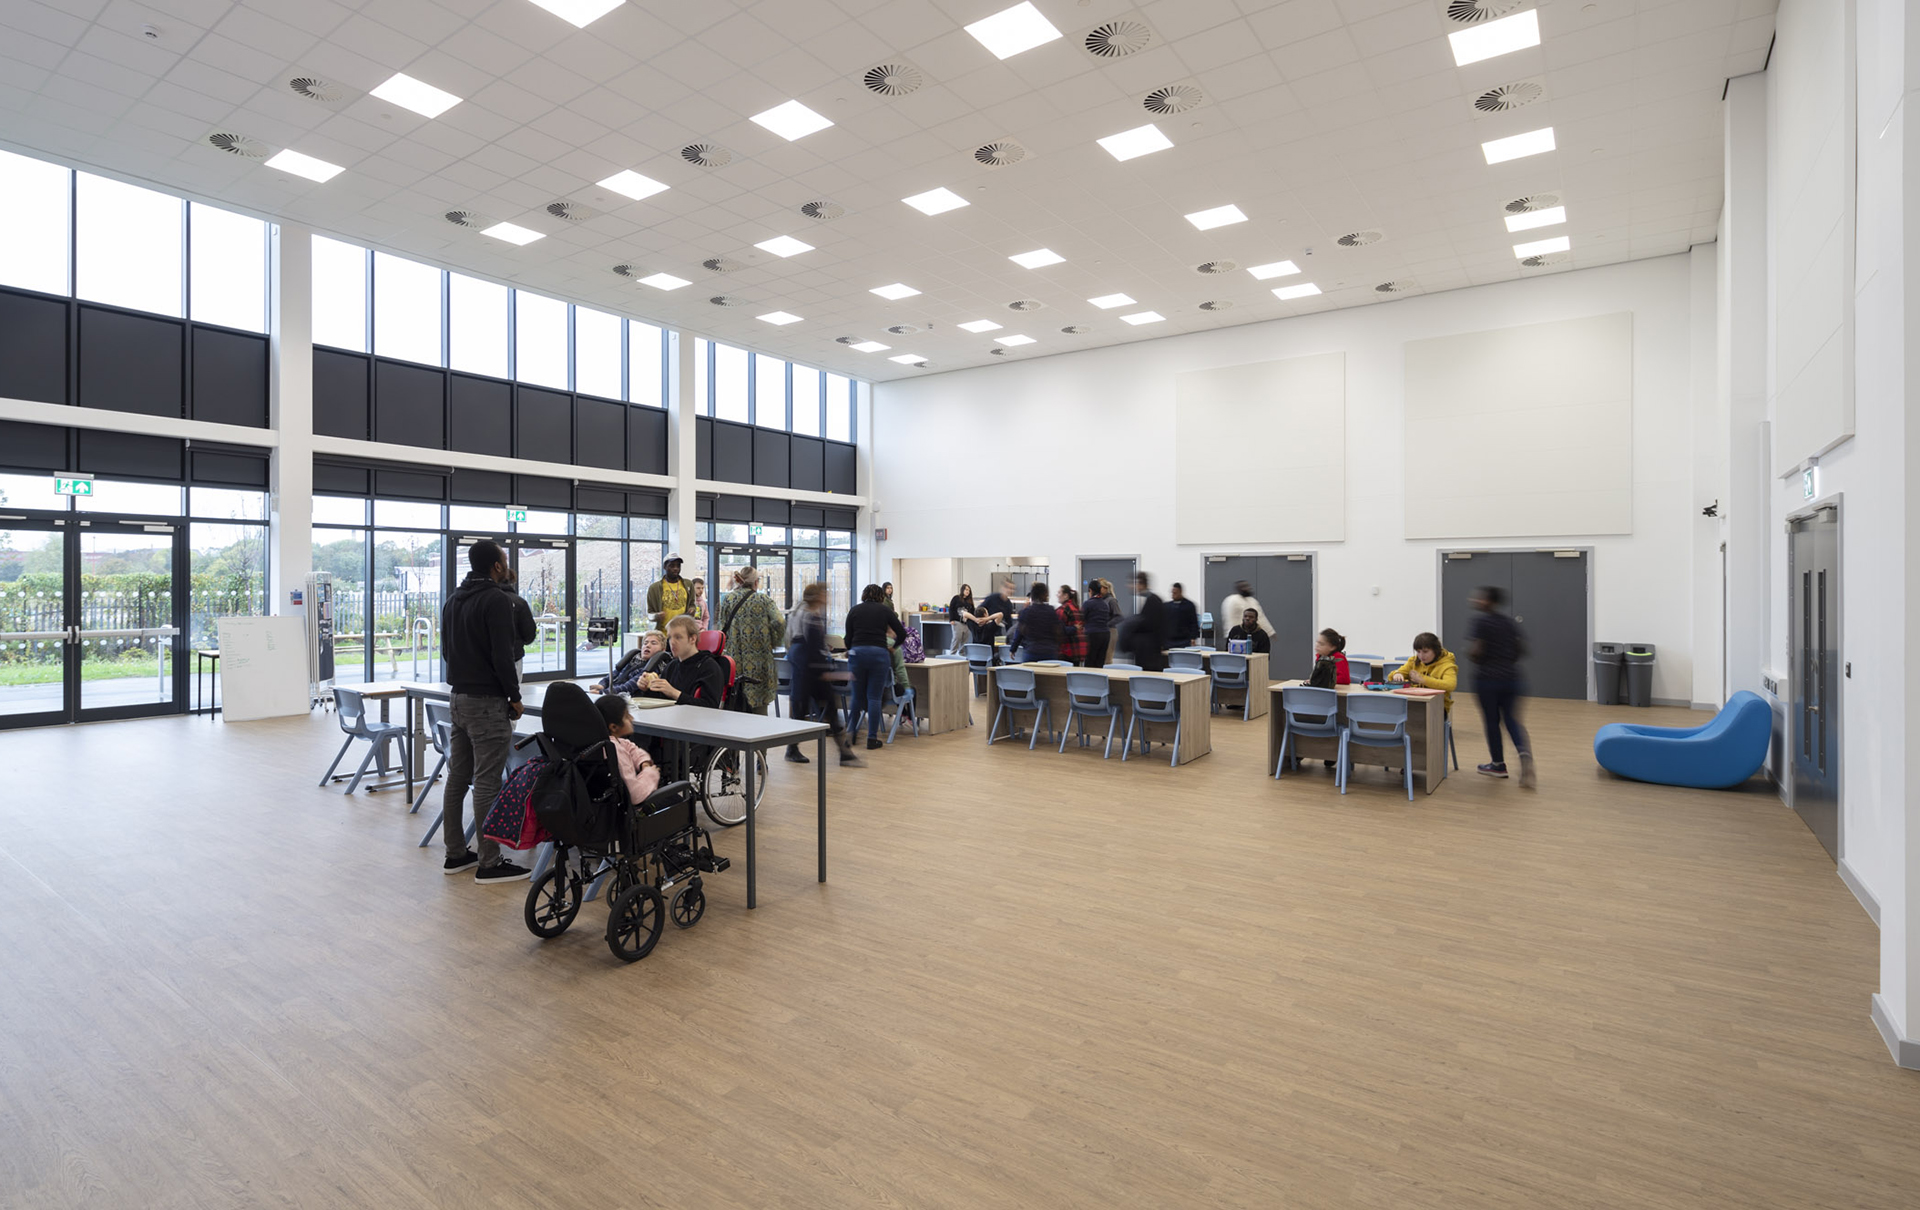 Students are gathering in the open-plan canteen with desks and chairs